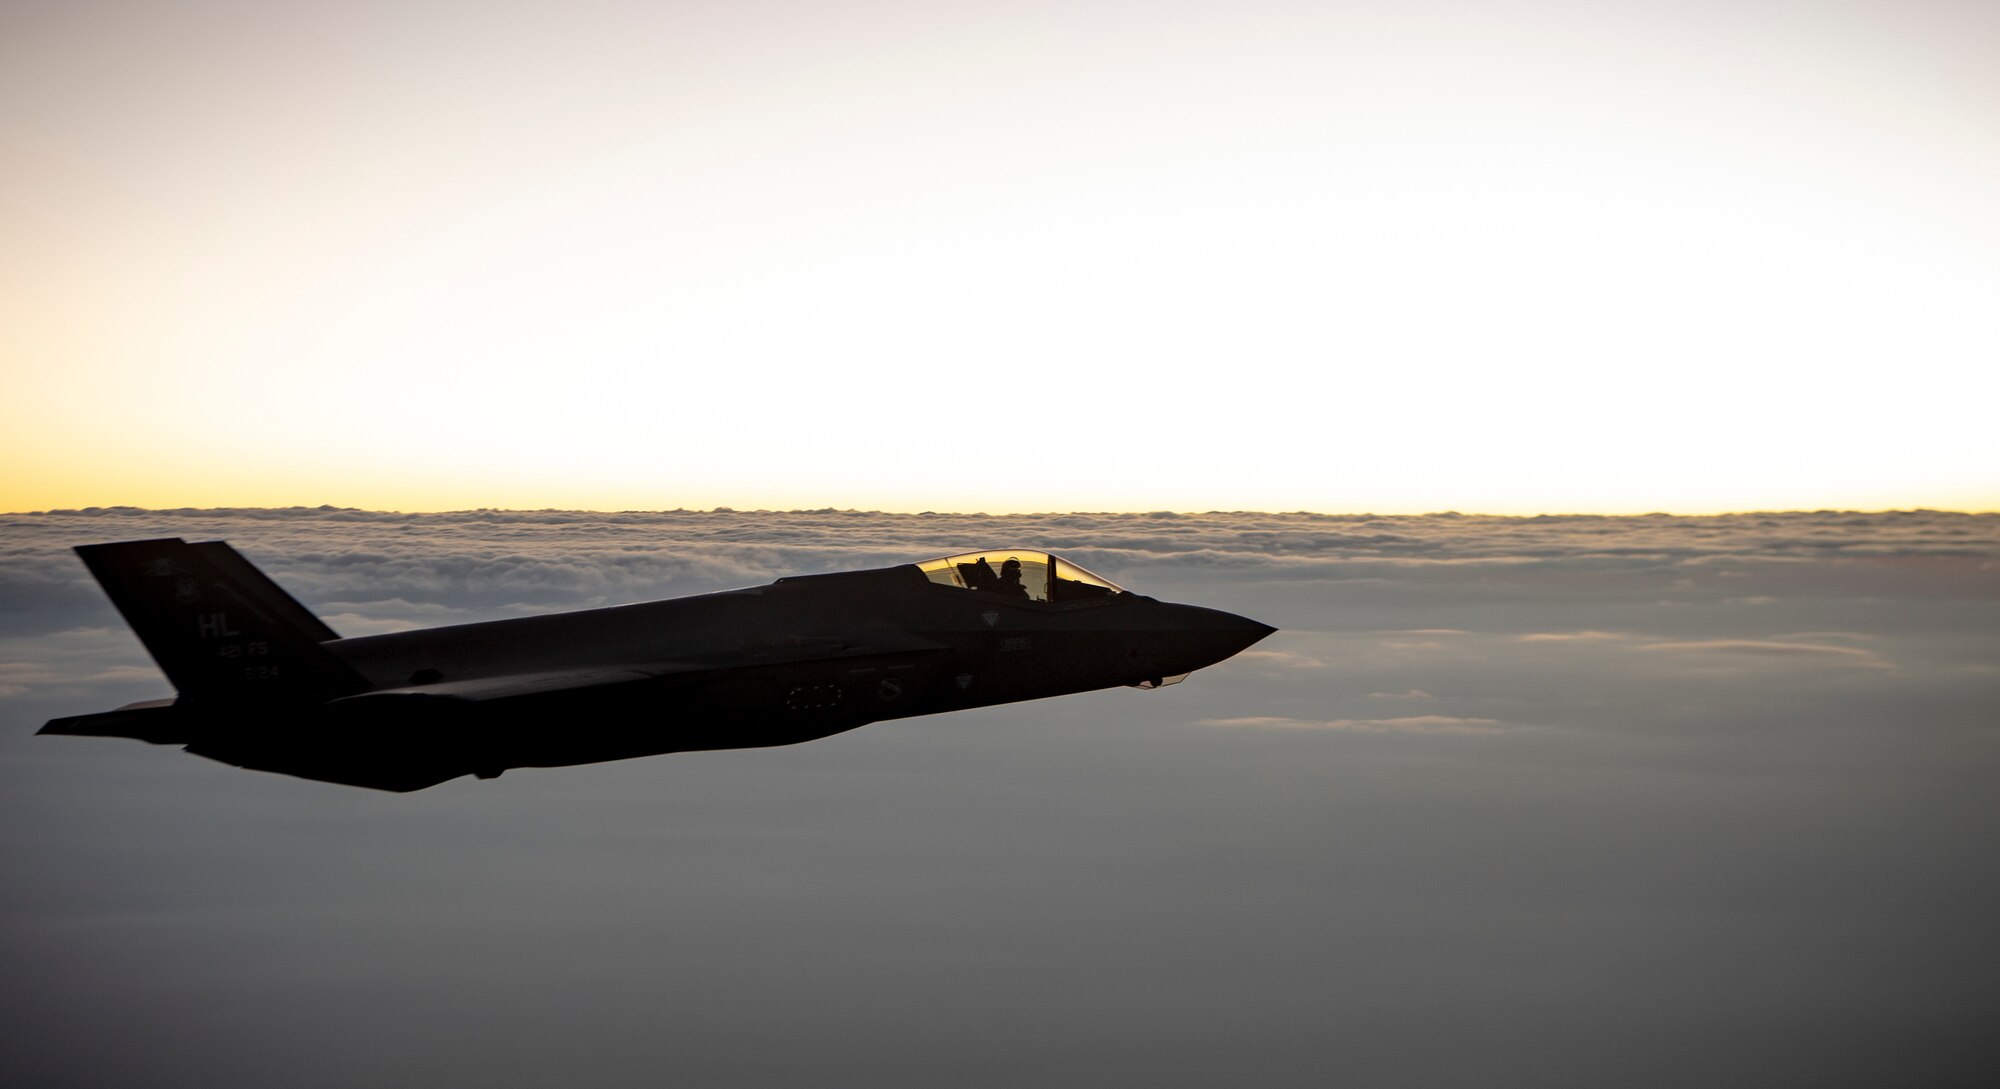 A U.S. Air Force F-35 Lightning II flies over the U.S. Central Command area of responsibility, July 15, 2020. The F-35 Lightning II is an agile, versatile, high-performance, multirole fighter that combines stealth, sensor fusion and unprecedented situational awareness.  (U.S. Air Force photo by Airman 1st Class Duncan C. Bevan)